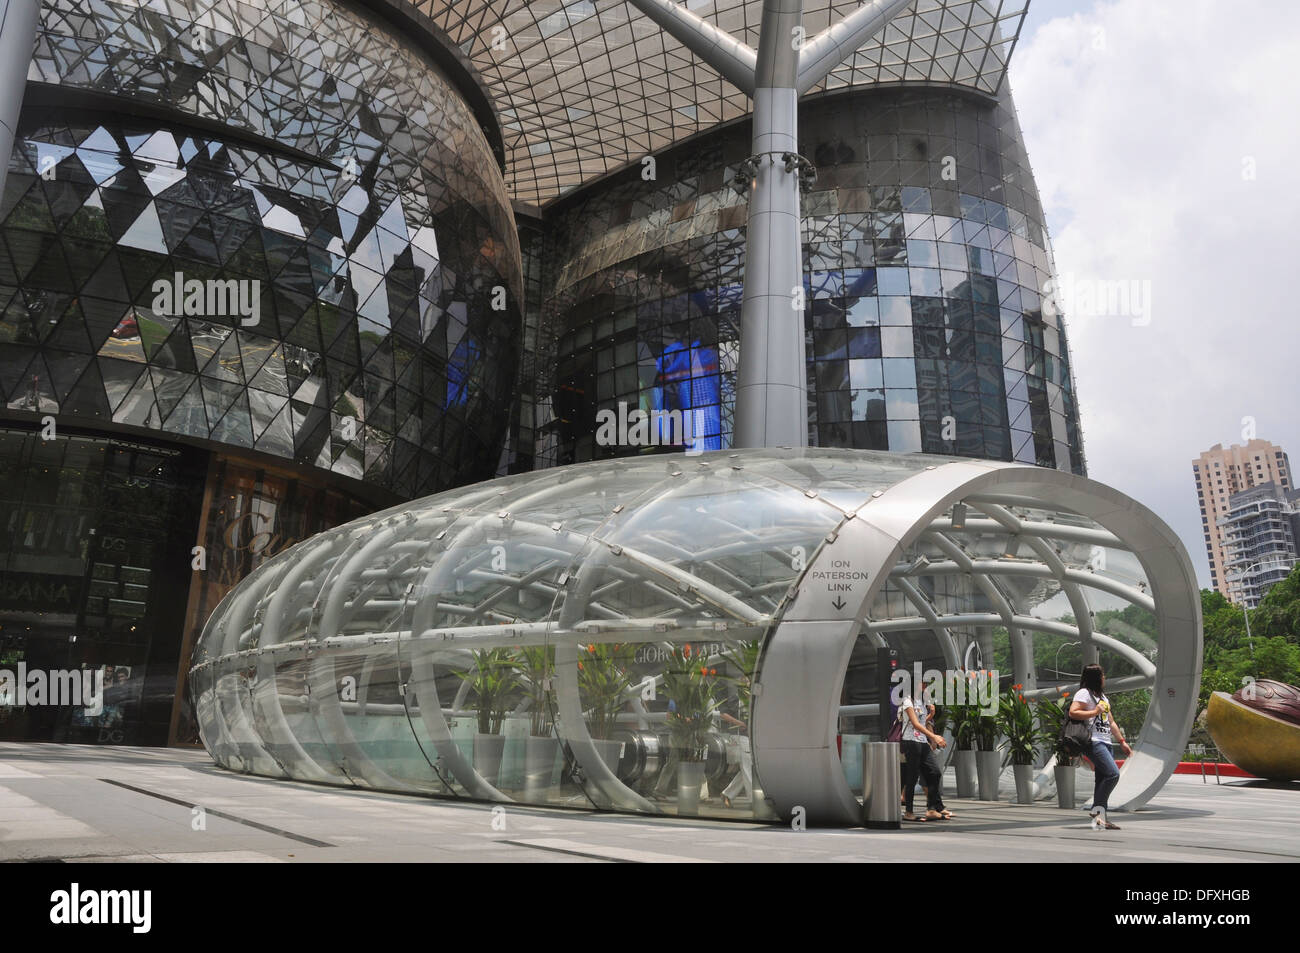 Asia / Singapore - November 22, 2019 : Louis Vuitton LV store in Singapore  Orchard Road ION shopping mall. The Louis Vuitton company operates with mor  Stock Photo - Alamy